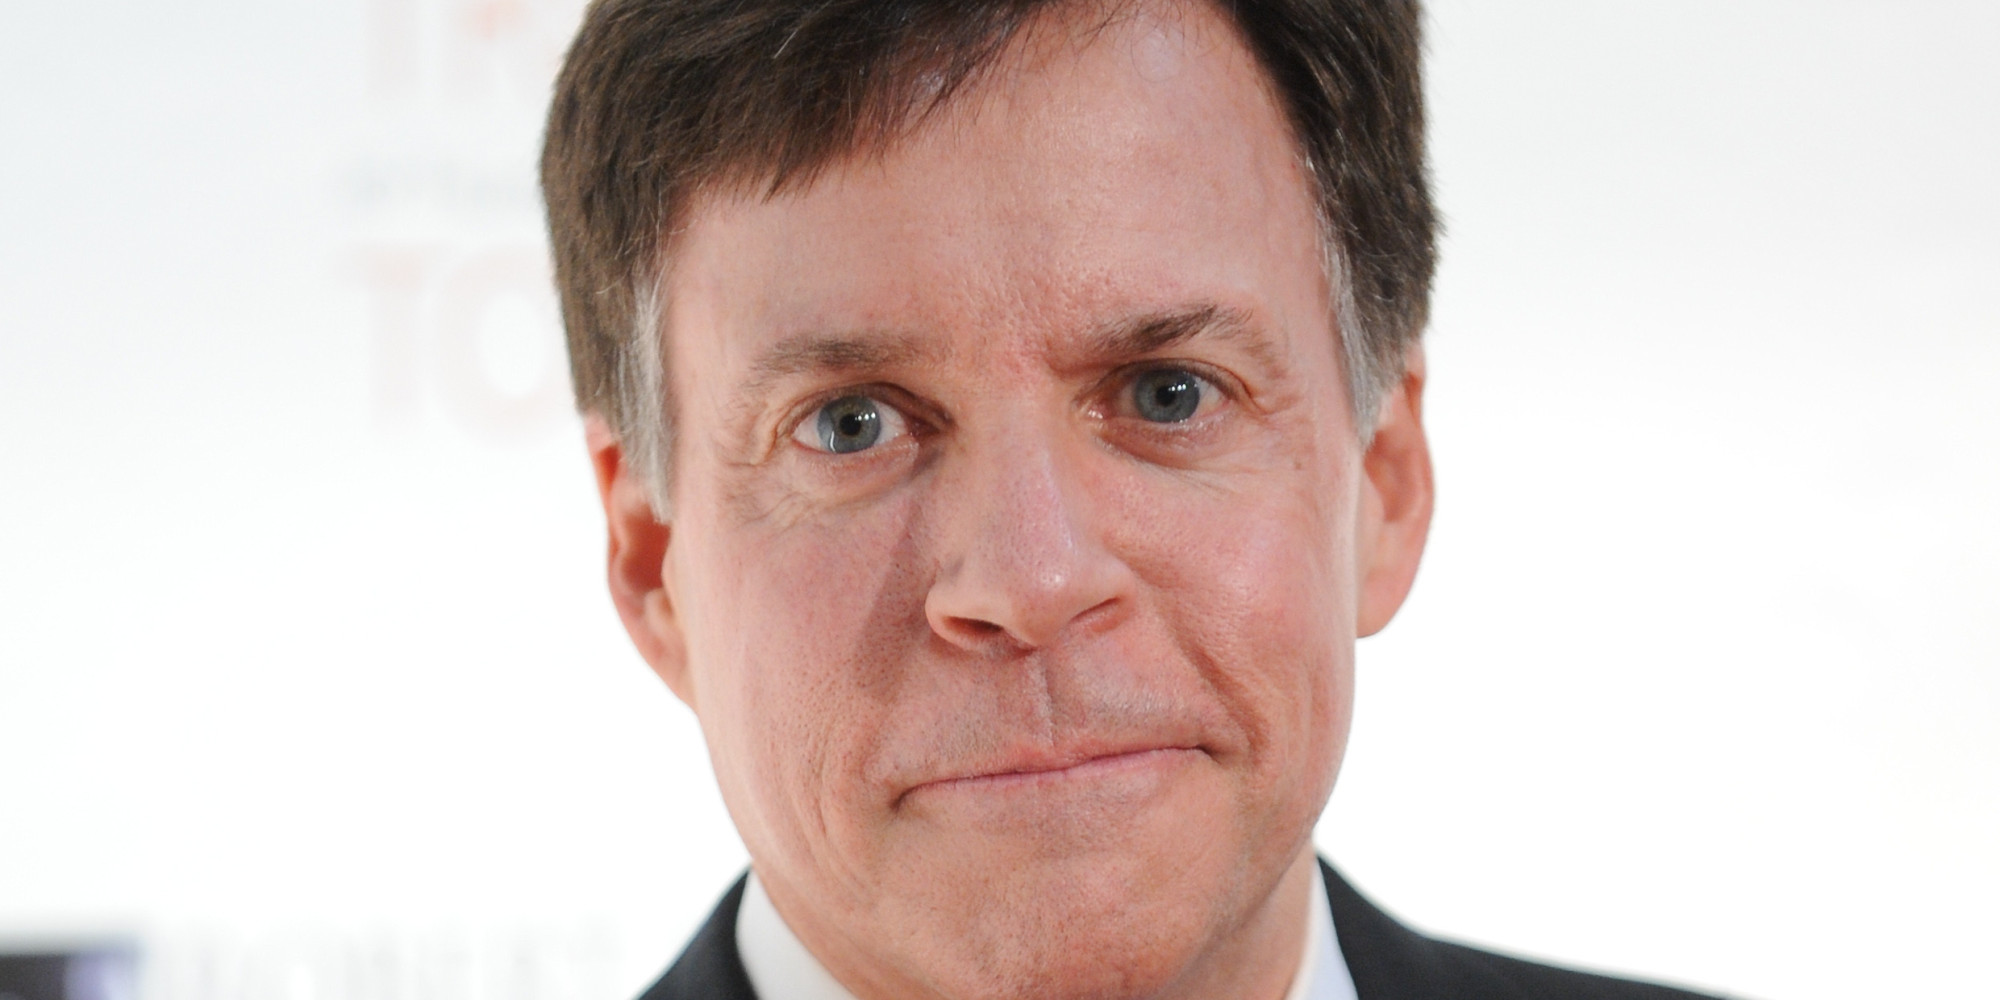 Bob Costas's Eye Infection: Why Pink Eye Is So Contagious